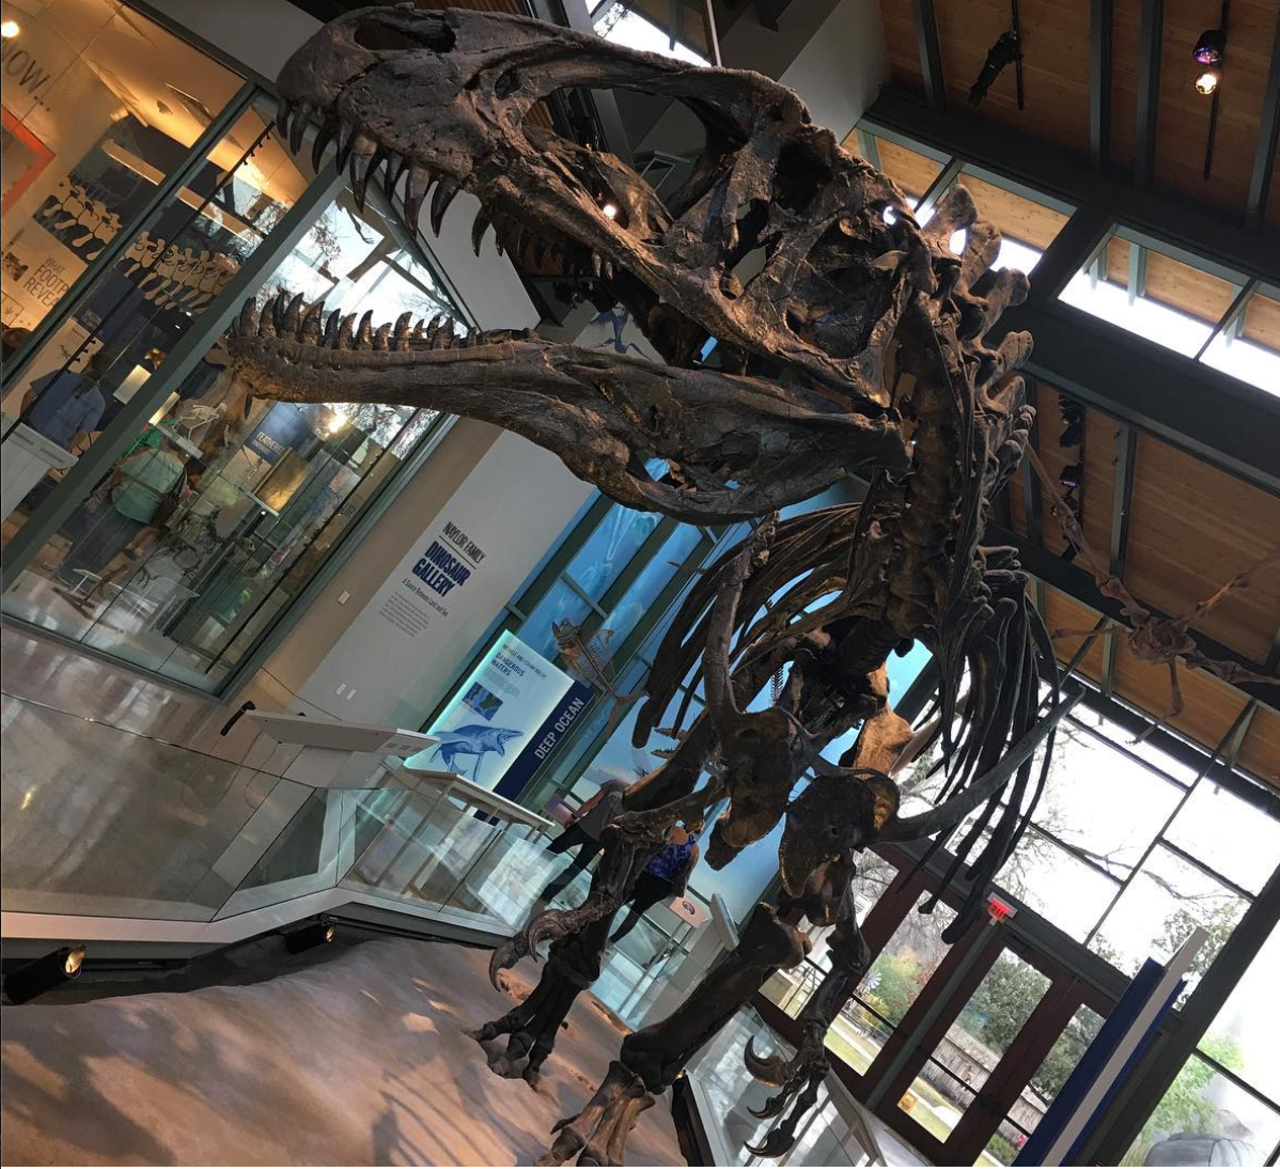 Free Admission at the Witte Museum
3801 Broadway, (210) 357-1900, wittemuseum.org
Free admission to the Witte runs on Tuesdays from 3-8pm. You'll have fun getting educated, especially if you take advantage of the special exhibit.
Photo via Instagram / kristendutsch